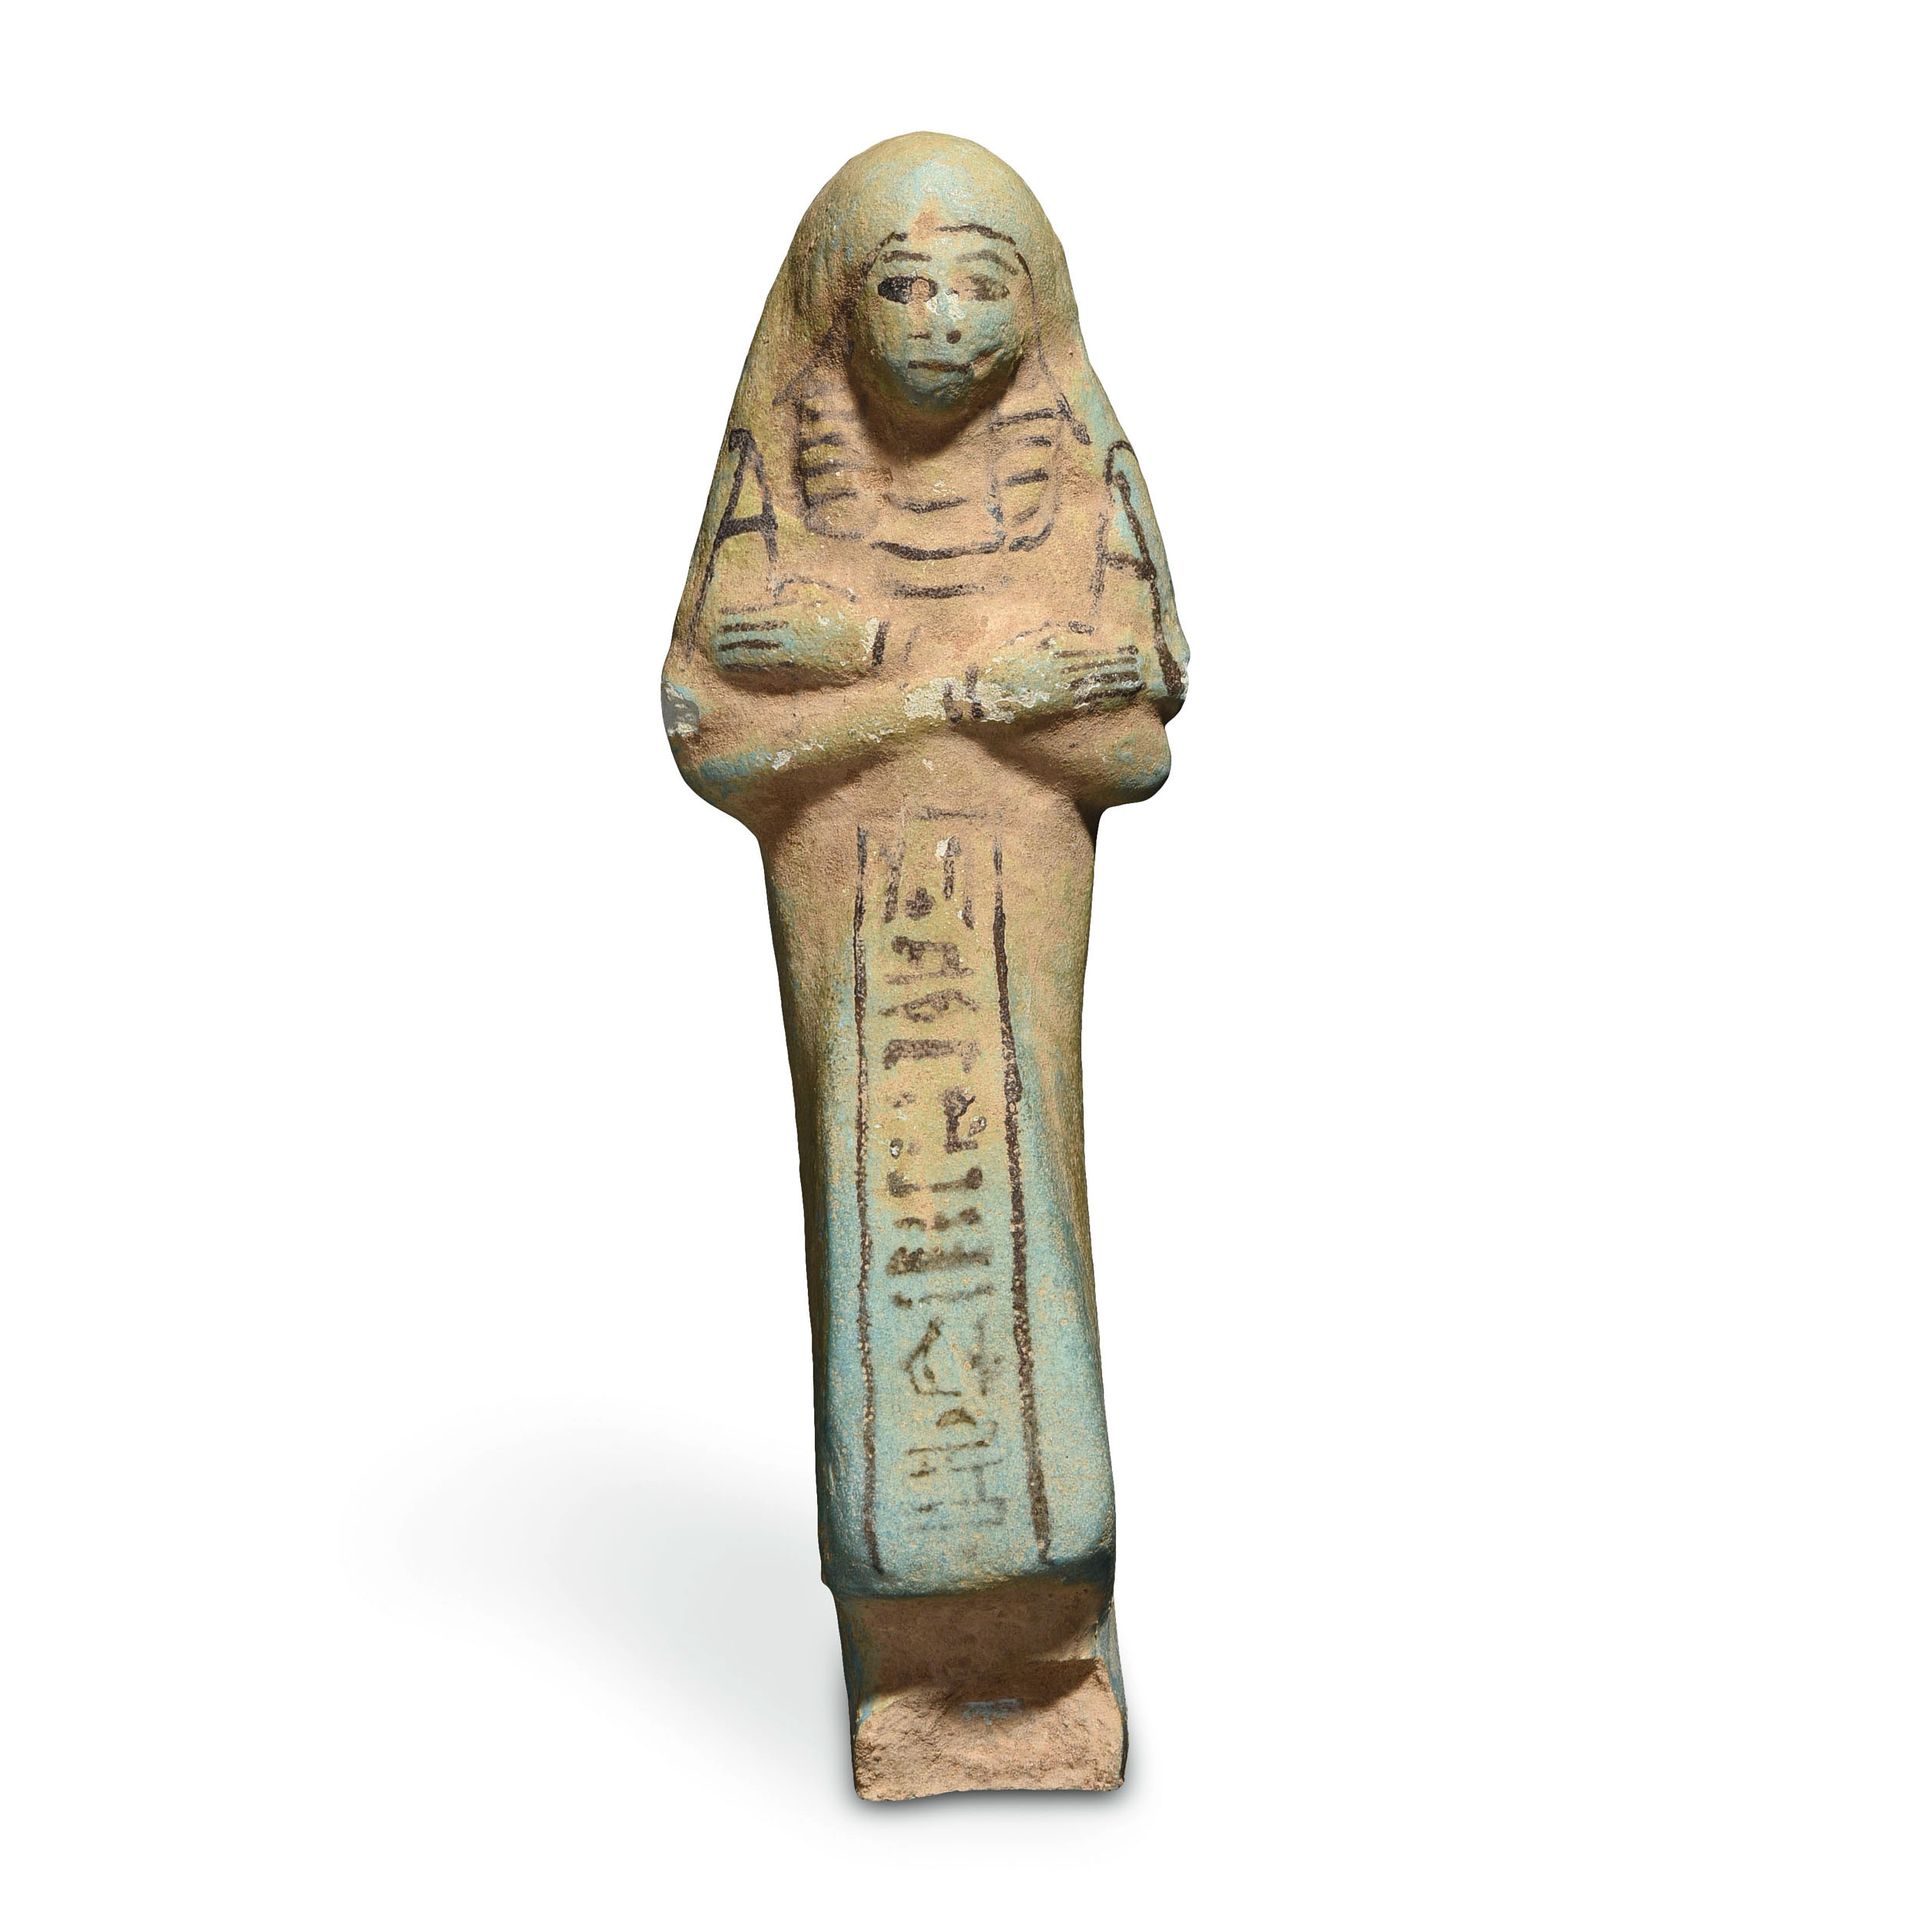 Null OUSHABTI IN COSTUME OF THE LIVING

Egypt, Third Intermediate Period, 1070-6&hellip;